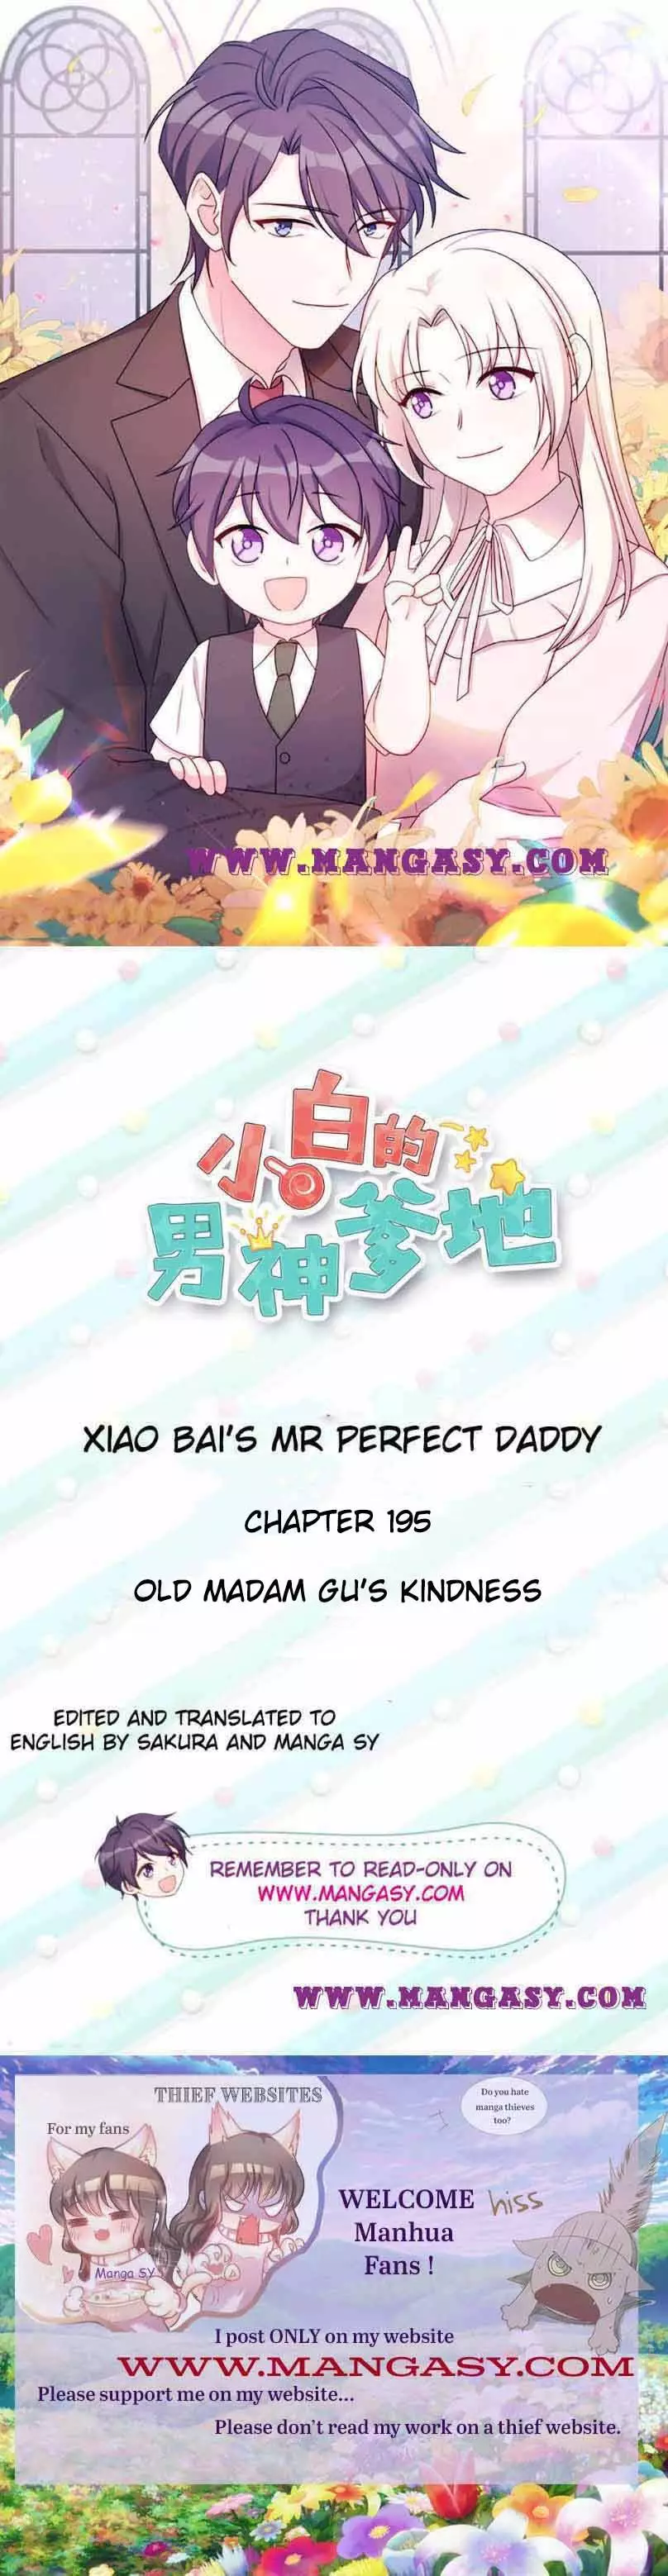 Xiao Bai’S Father Is A Wonderful Person - 195 page 1-c3dddd30